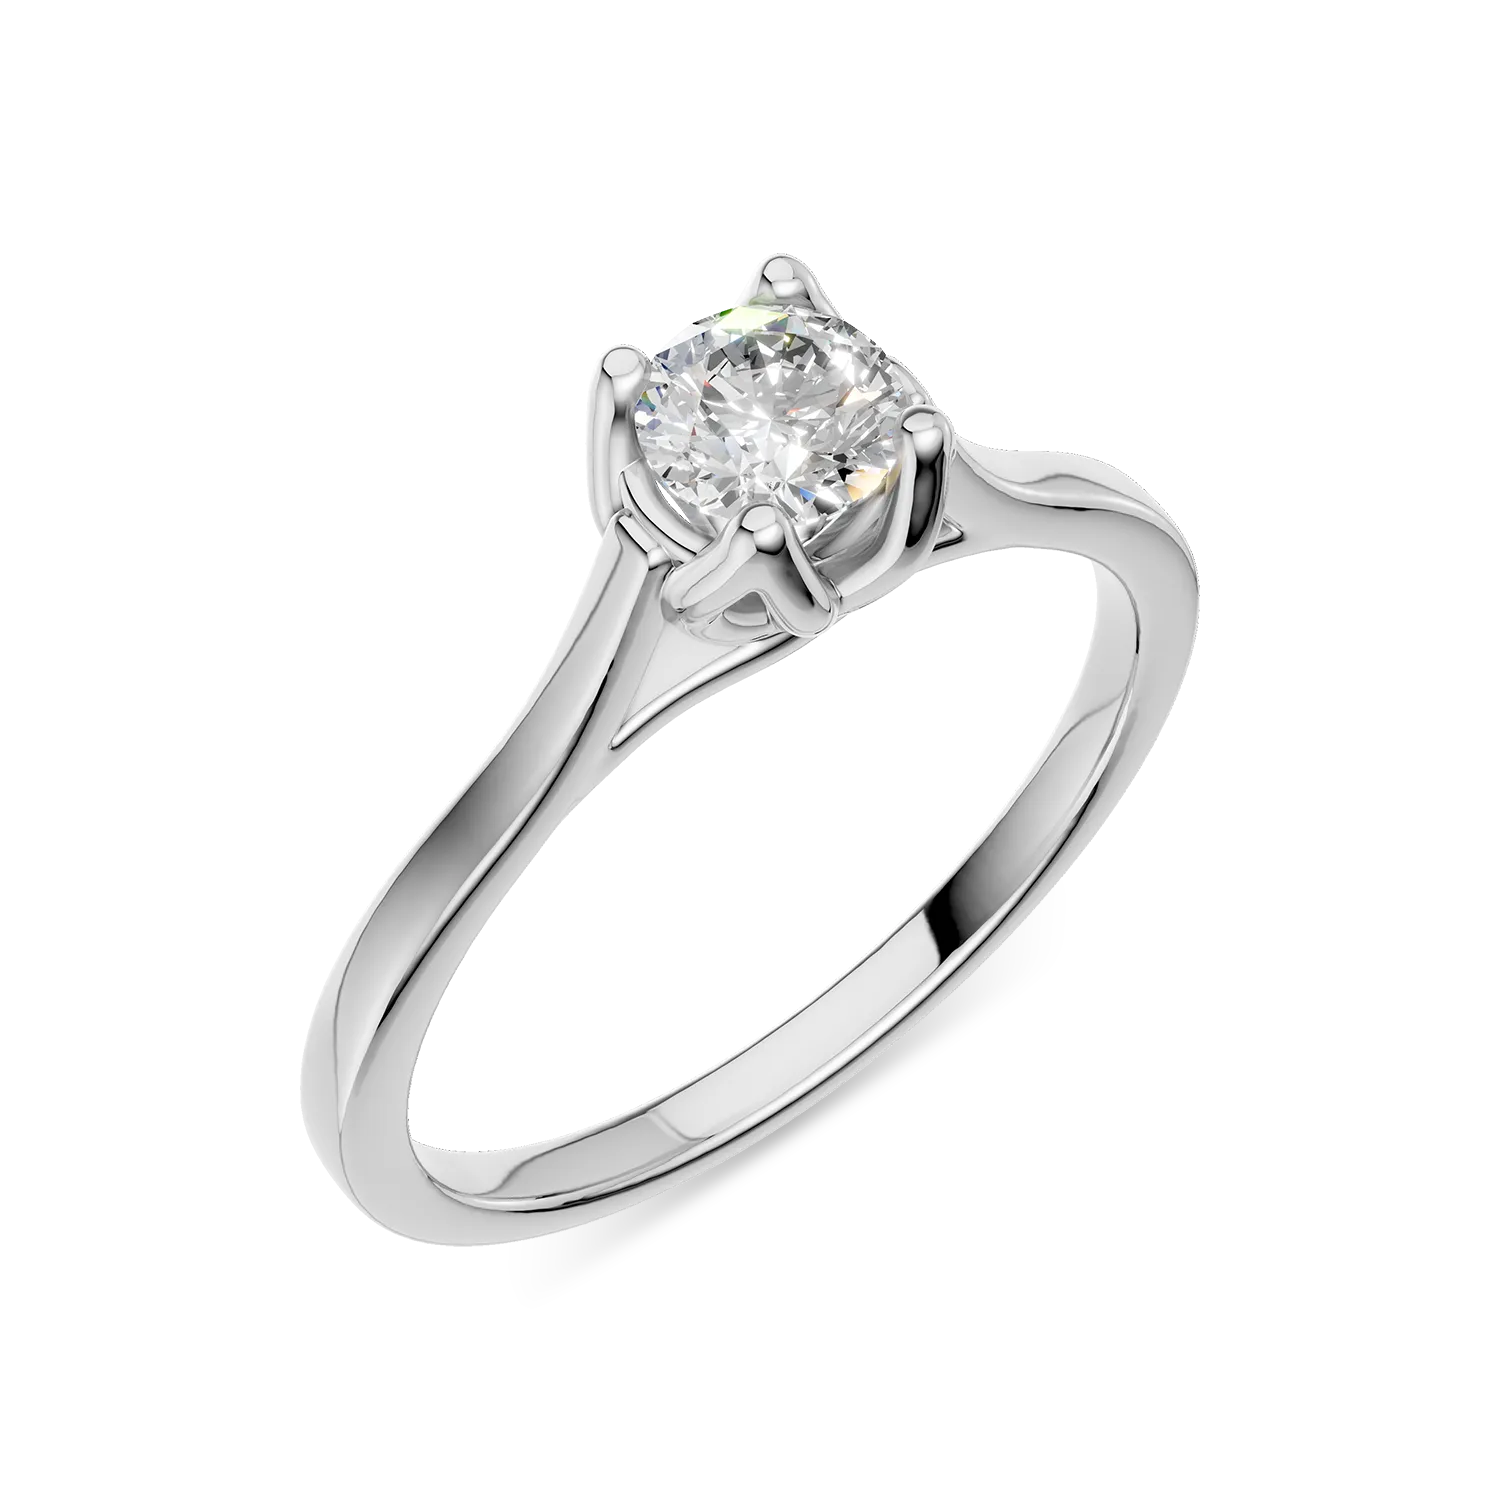 White gold Lotus engagement ring with 0.3ct solitaire lab grown diamond